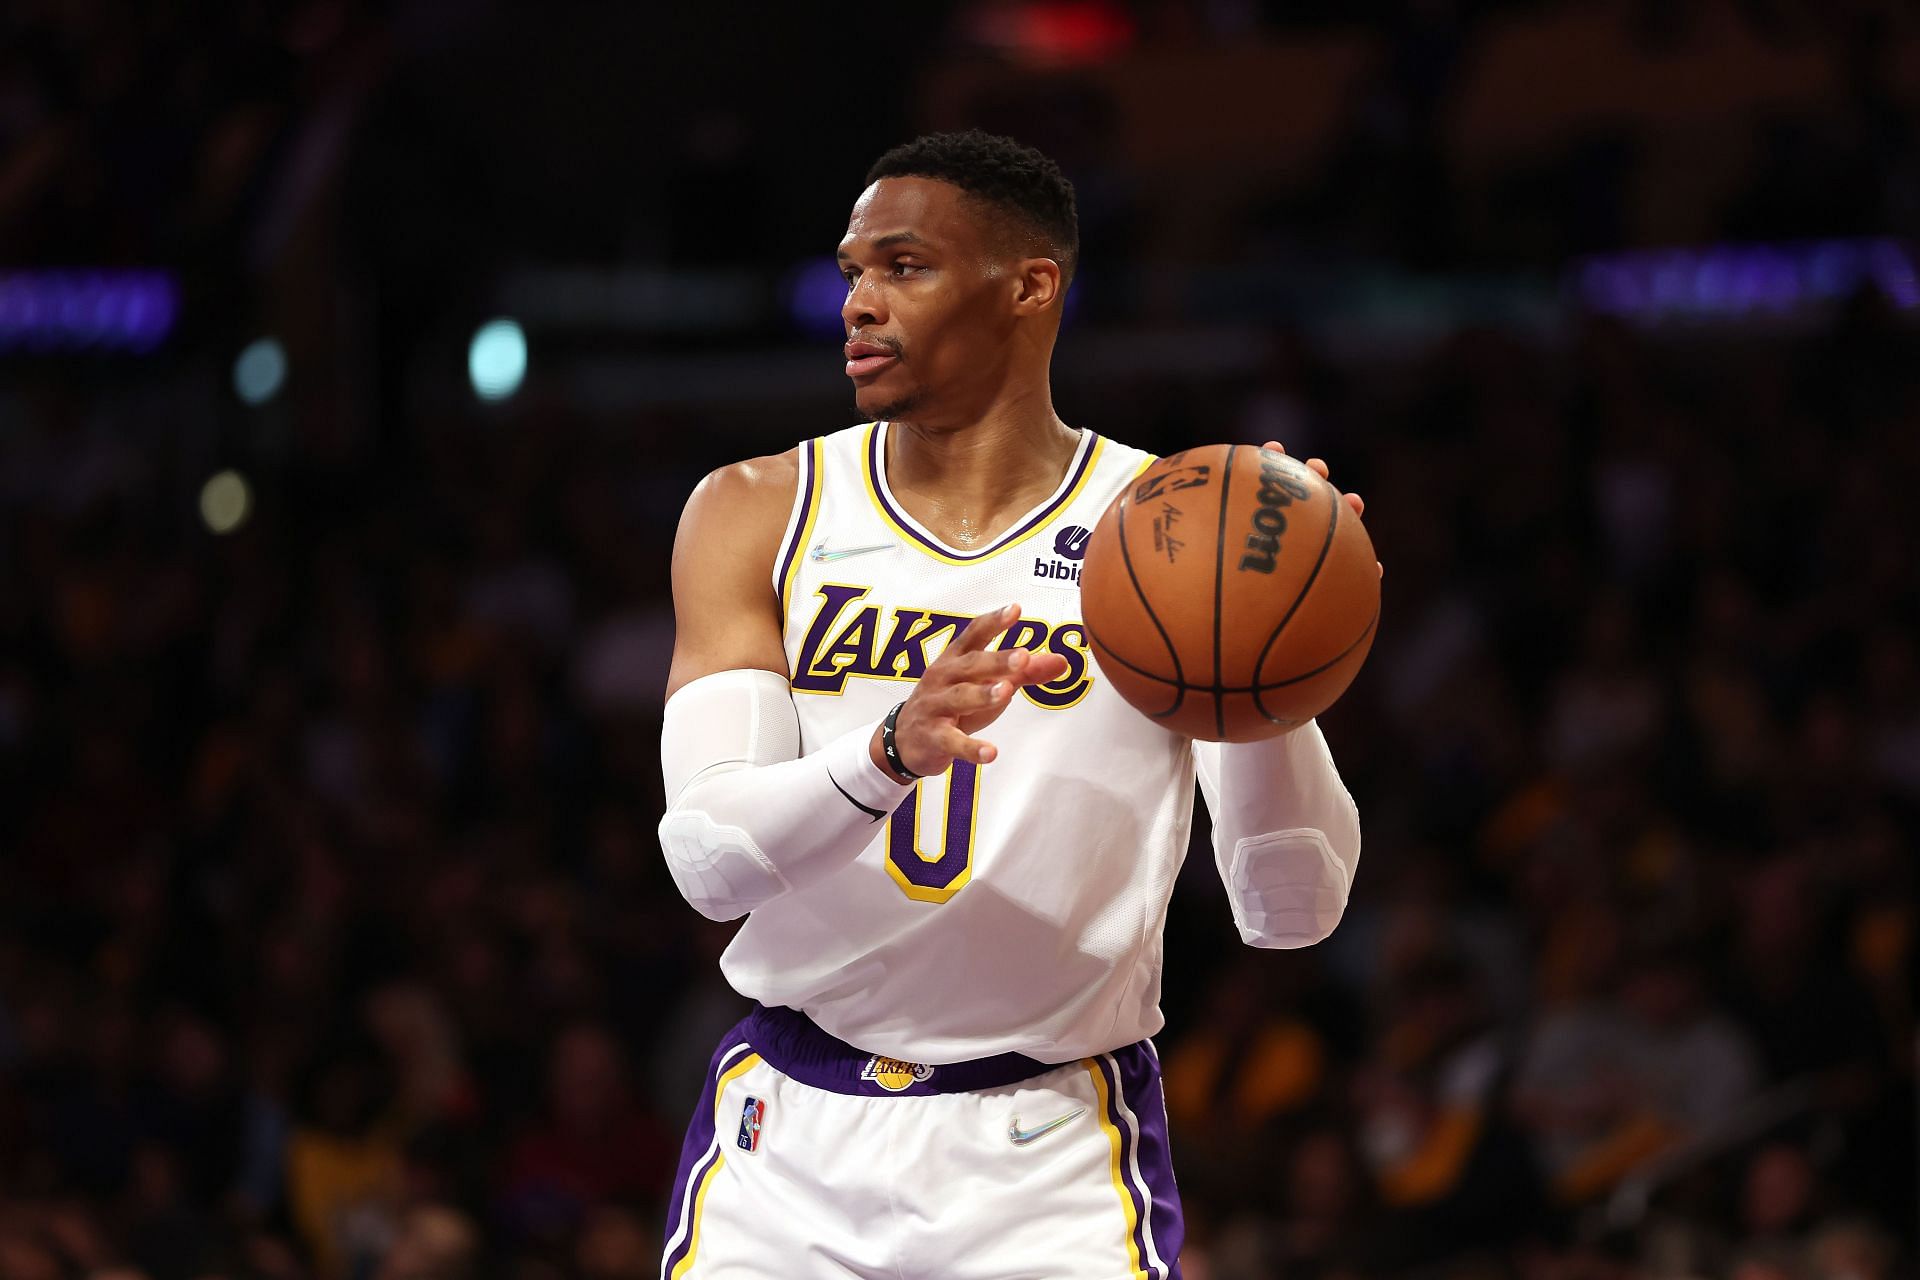 Russell Westbrook of the LA Lakers.